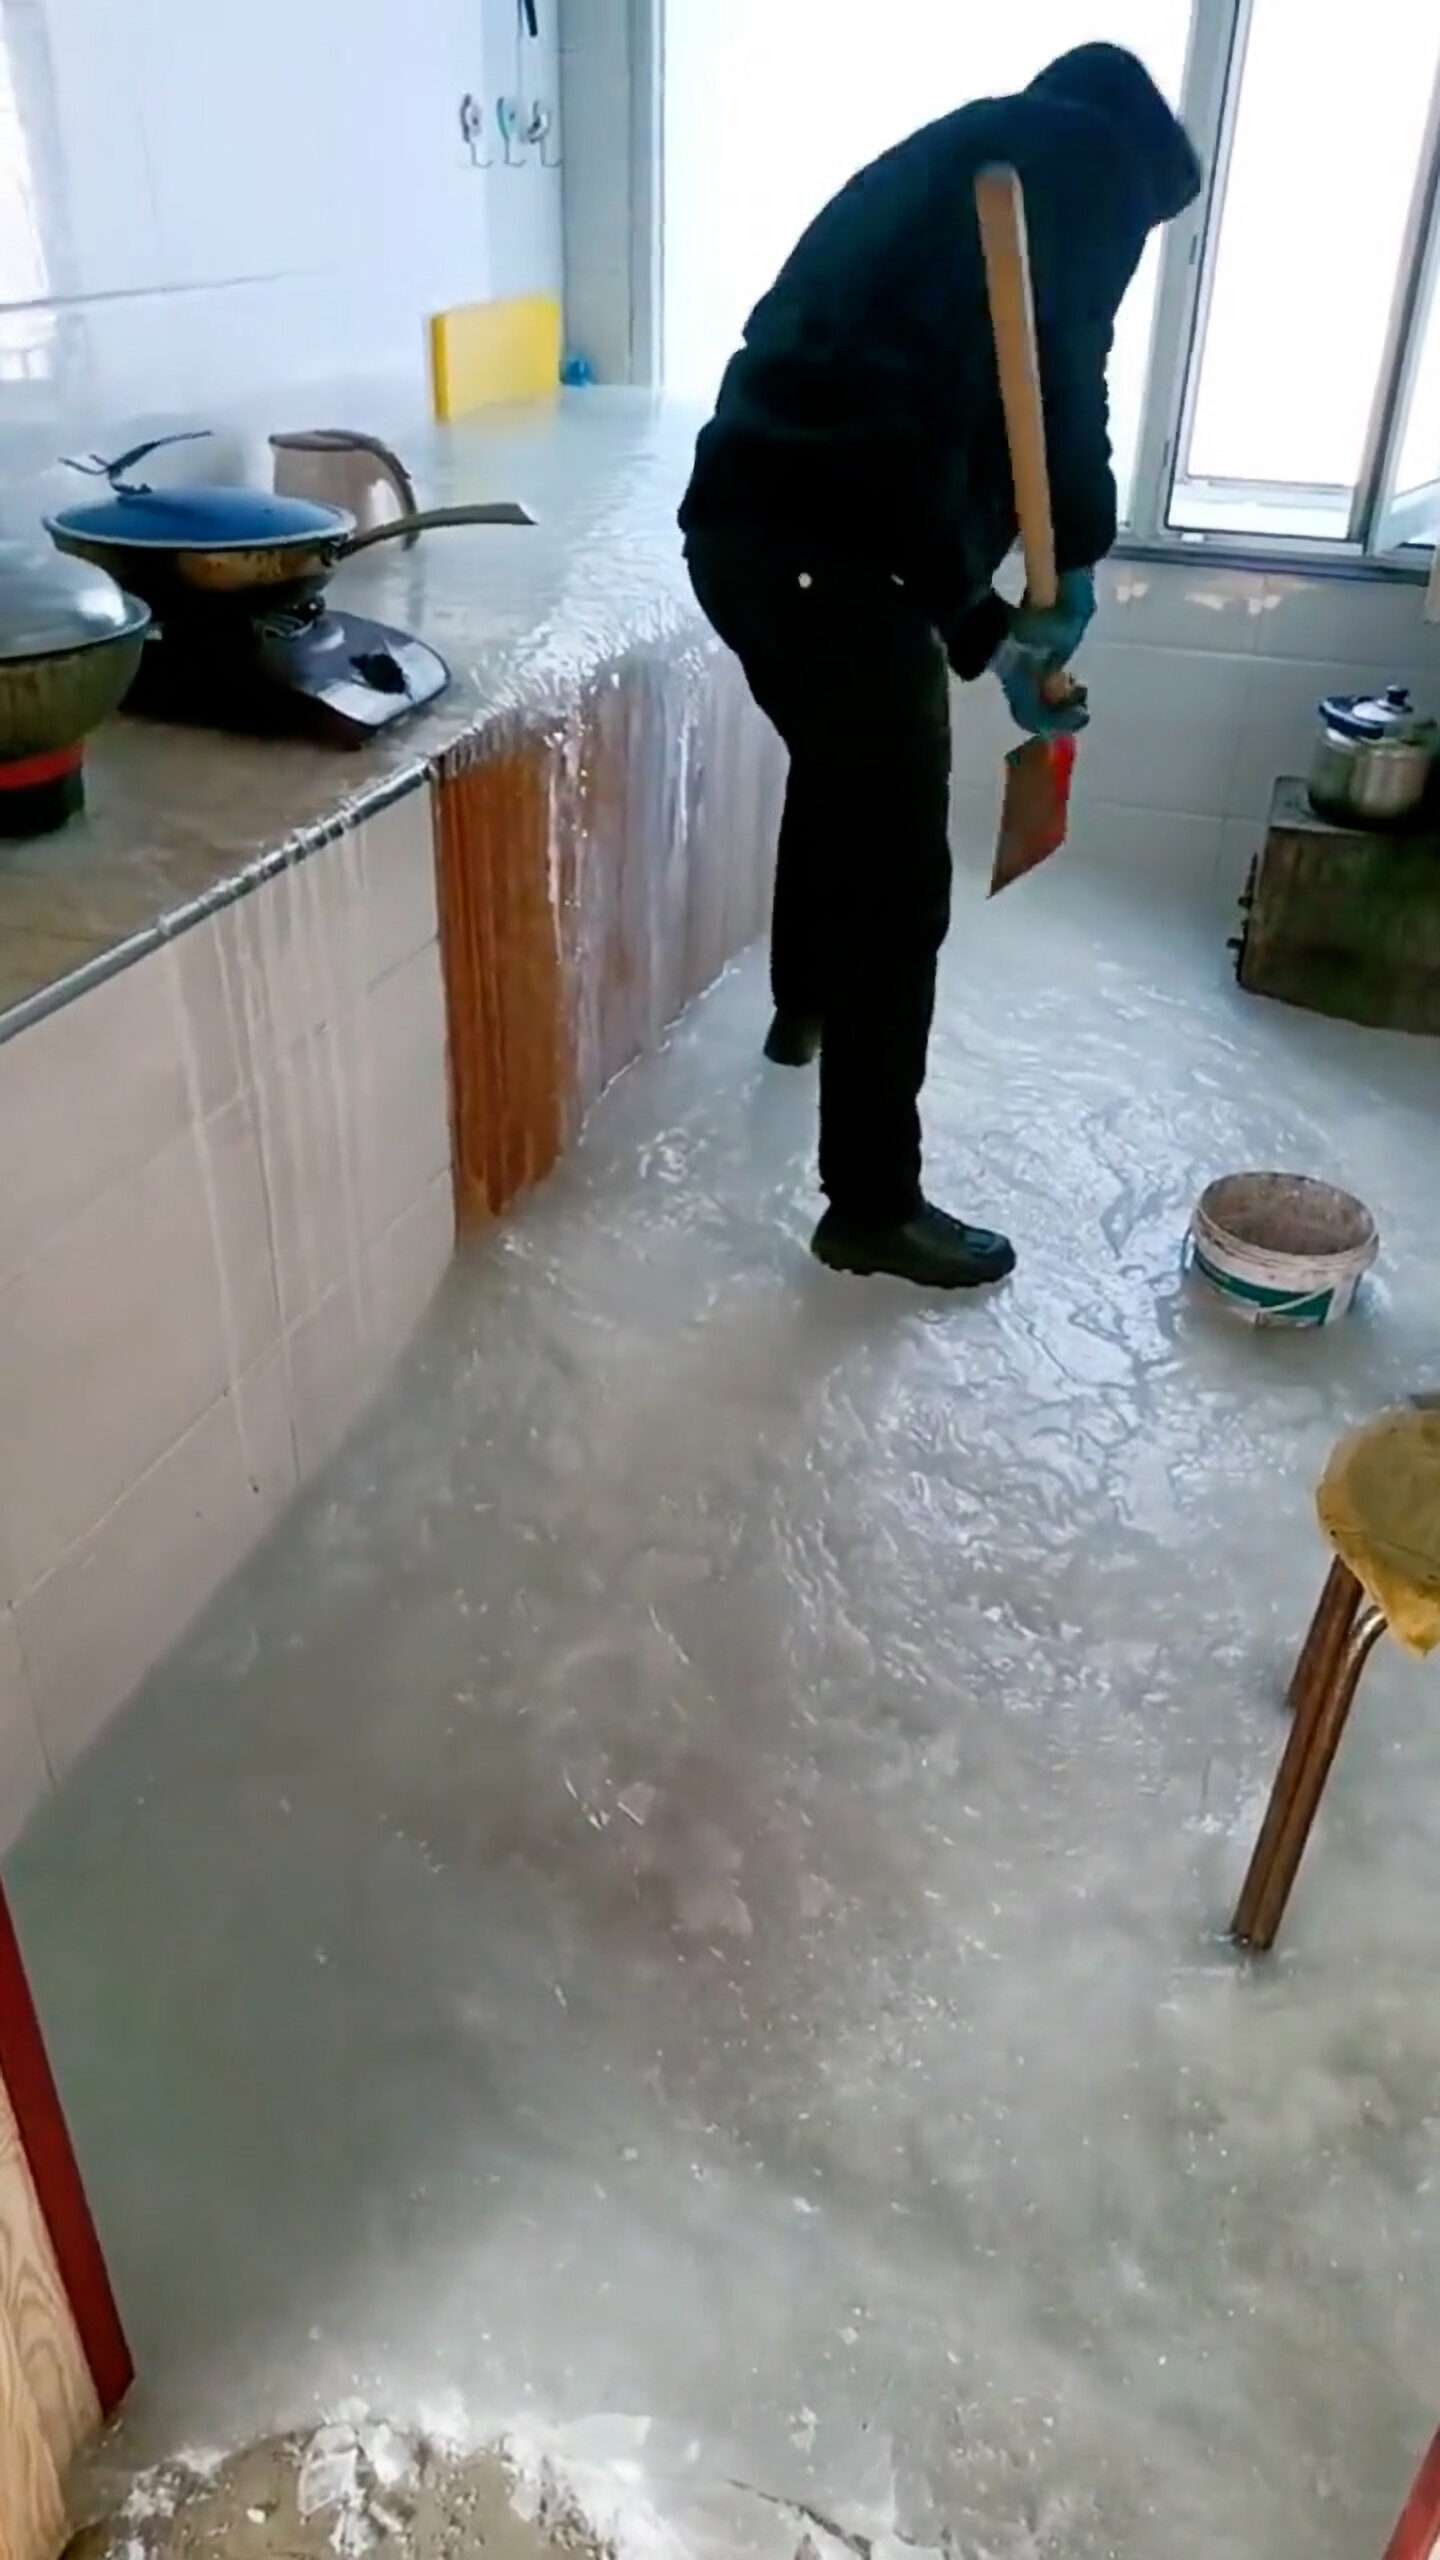 Read more about the article KITCHEN FRIDGE: Man Finds Ice Rink At Home After Pipe Broke And Water Froze